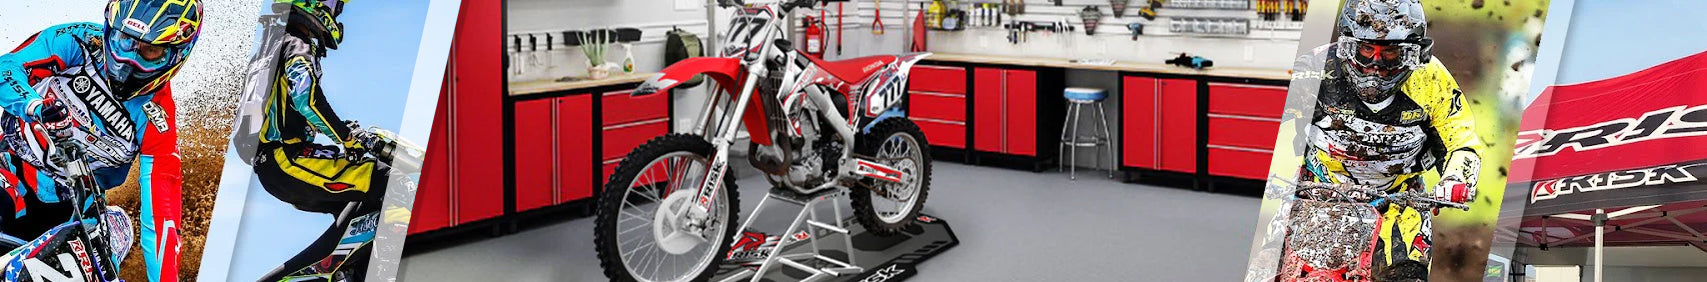 Moto Garage Collection Banner featuring a red dirt bike on an rr1 ride on mx stand that's on a factory pit mat. Bright garage featuring TriLights, red cabinets, and a giant Risk Racing Sticker.